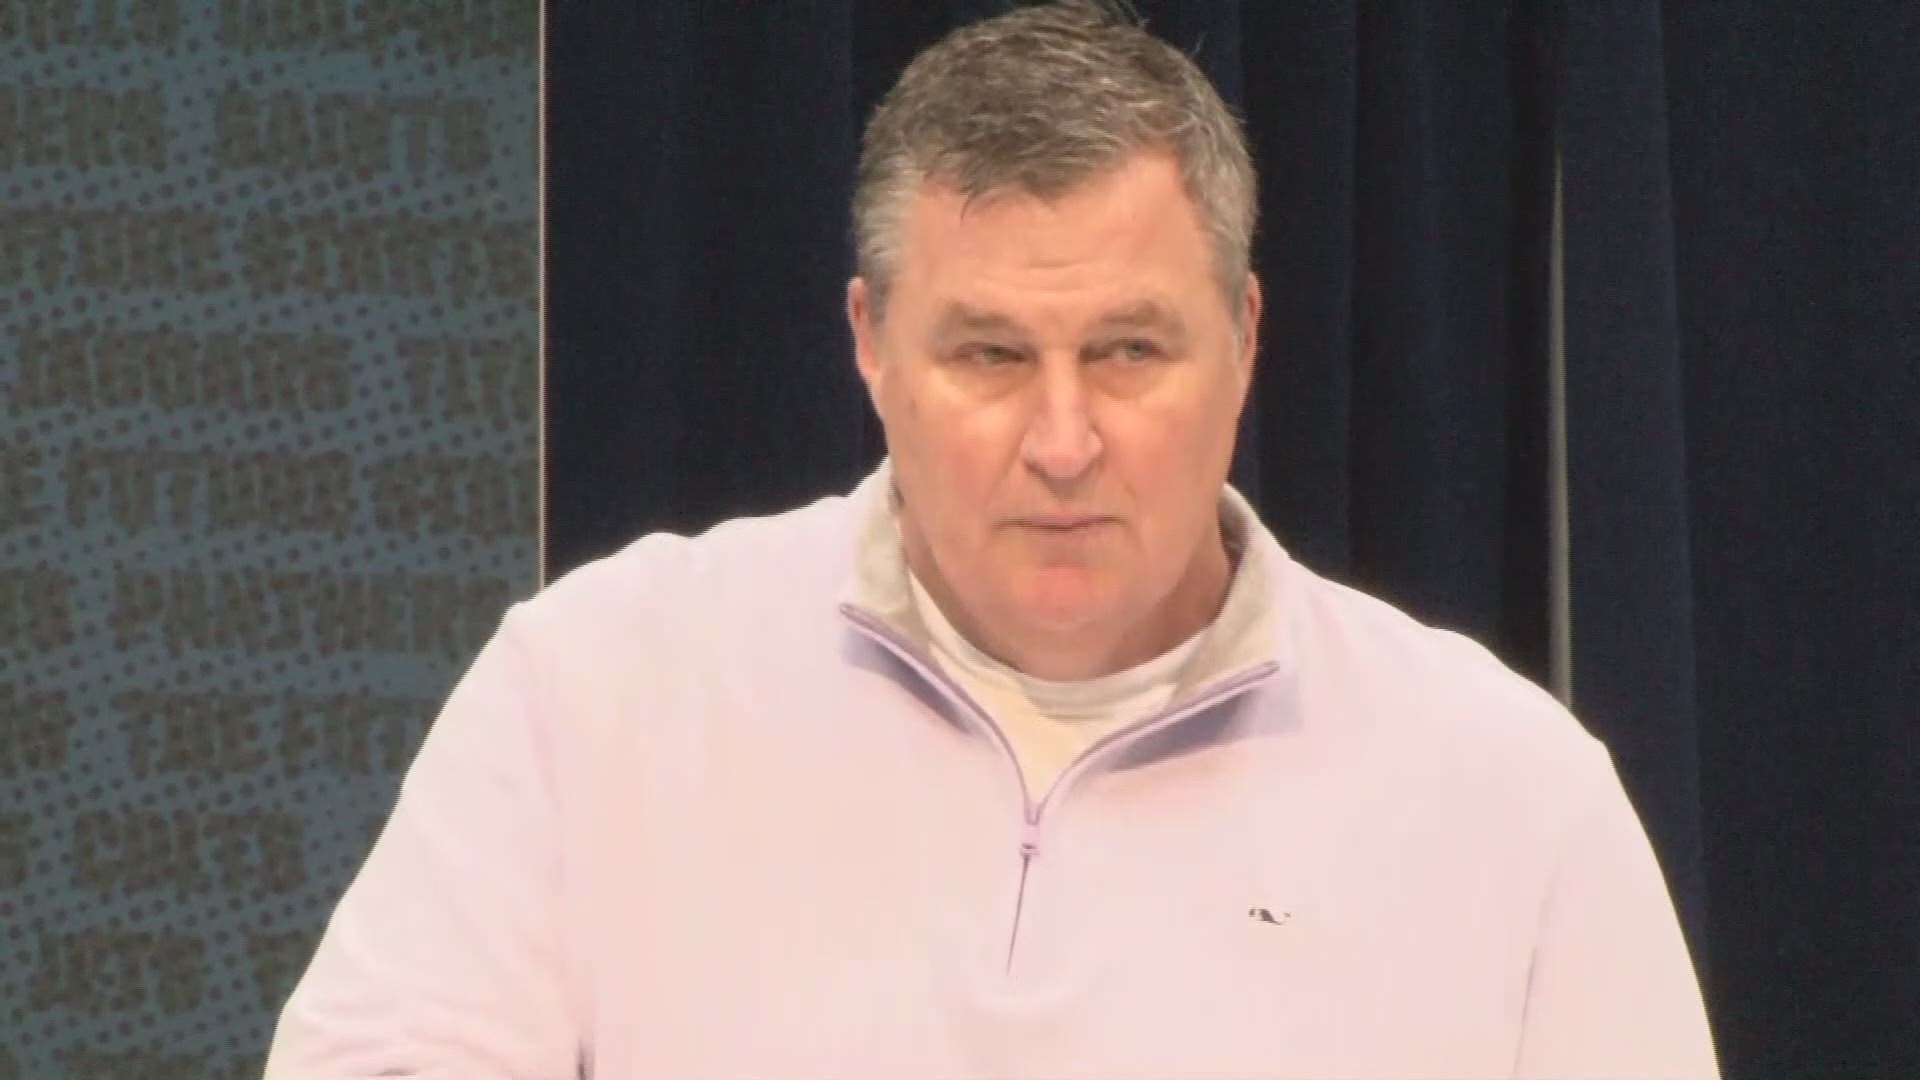 Jacksonville Jaguars head coach Doug Marrone spoke about the upcoming NFL draft and getting the Jaguars back on track for the 2019 season at the NFL Combine Wednesday morning.